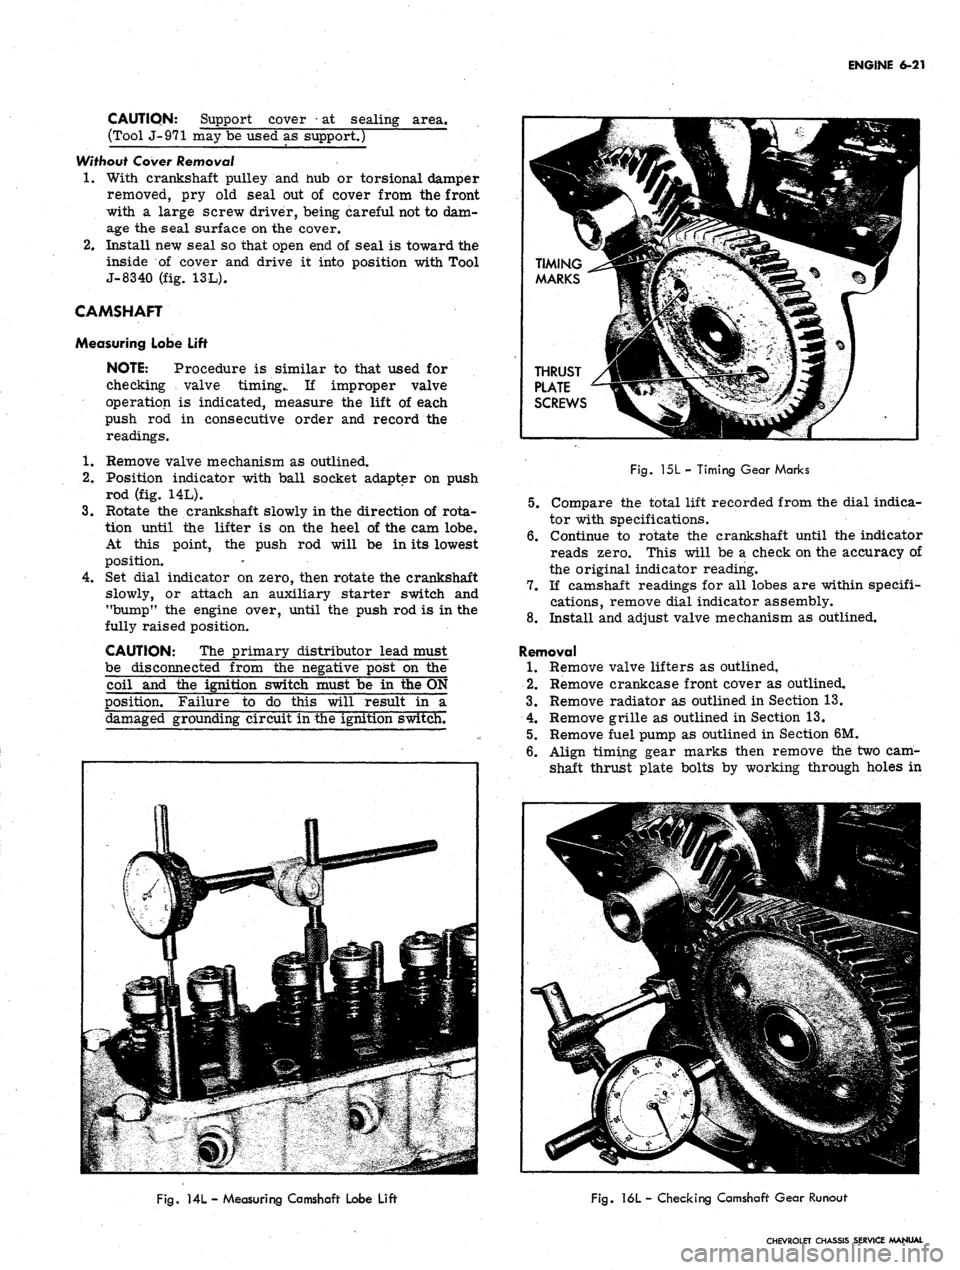 CHEVROLET CAMARO 1967 1.G Chassis Workshop Manual 
ENGINE 6-21

CAUTION: Support cover
 •
 at sealing area.

(Tool J-971 may be used as support.)

Without Cover
 Removal

1.
 With crankshaft pulley and nub or torsional damper

removed, pry old seal